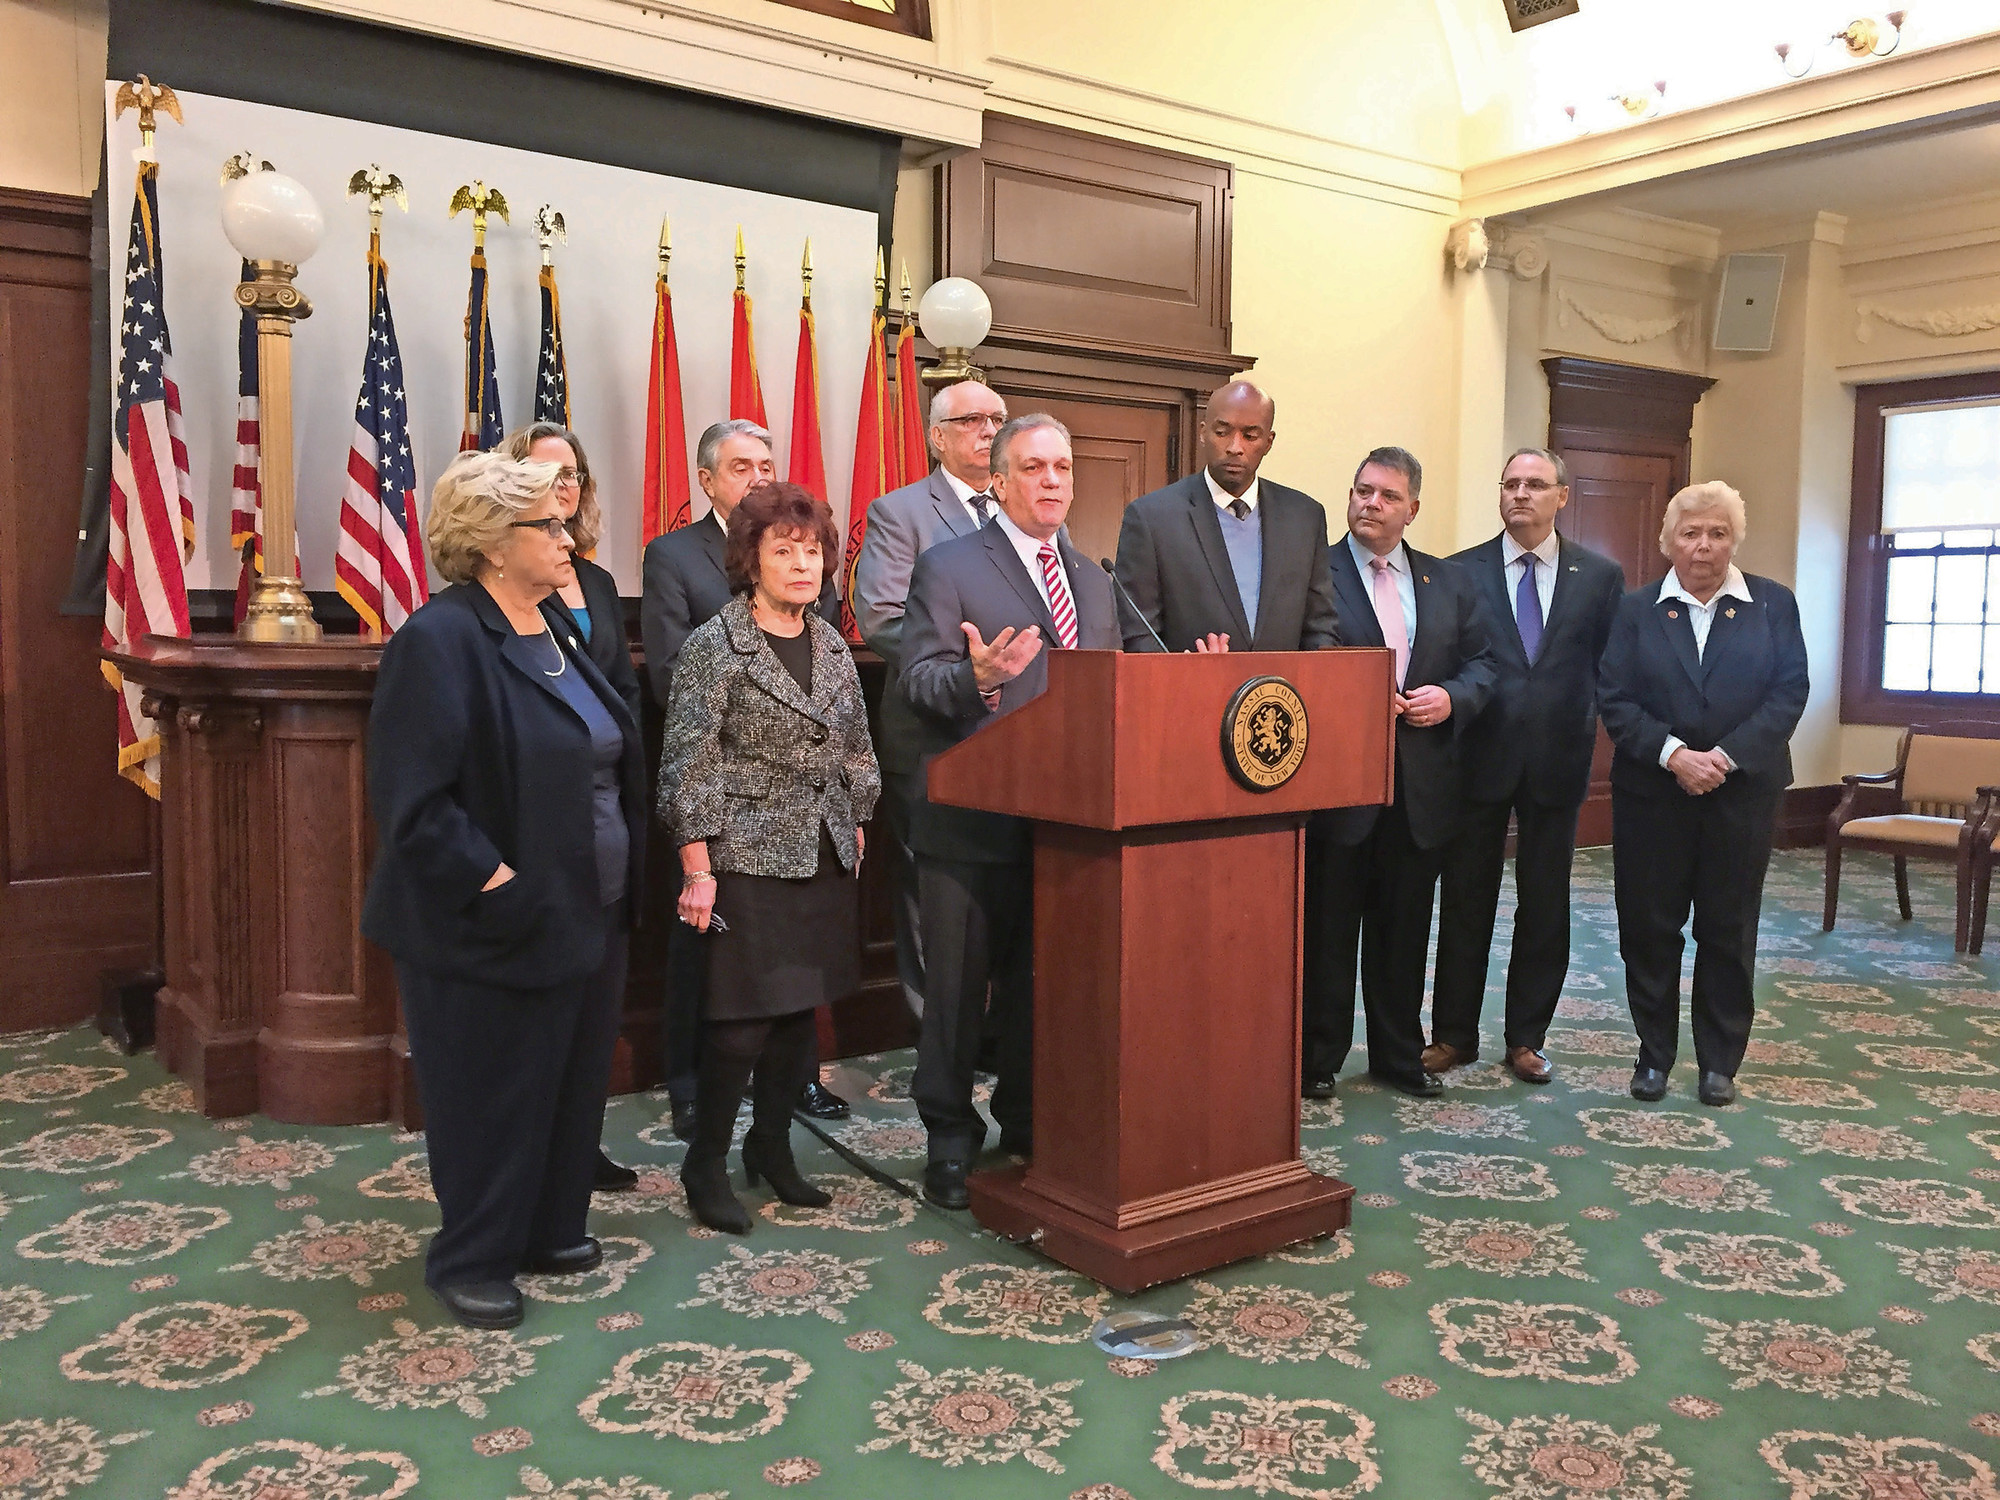 County Executive Ed Mangano announced on Feb. 10 that Nassau leaders had designated an additional $3 million for the NICE bus system.